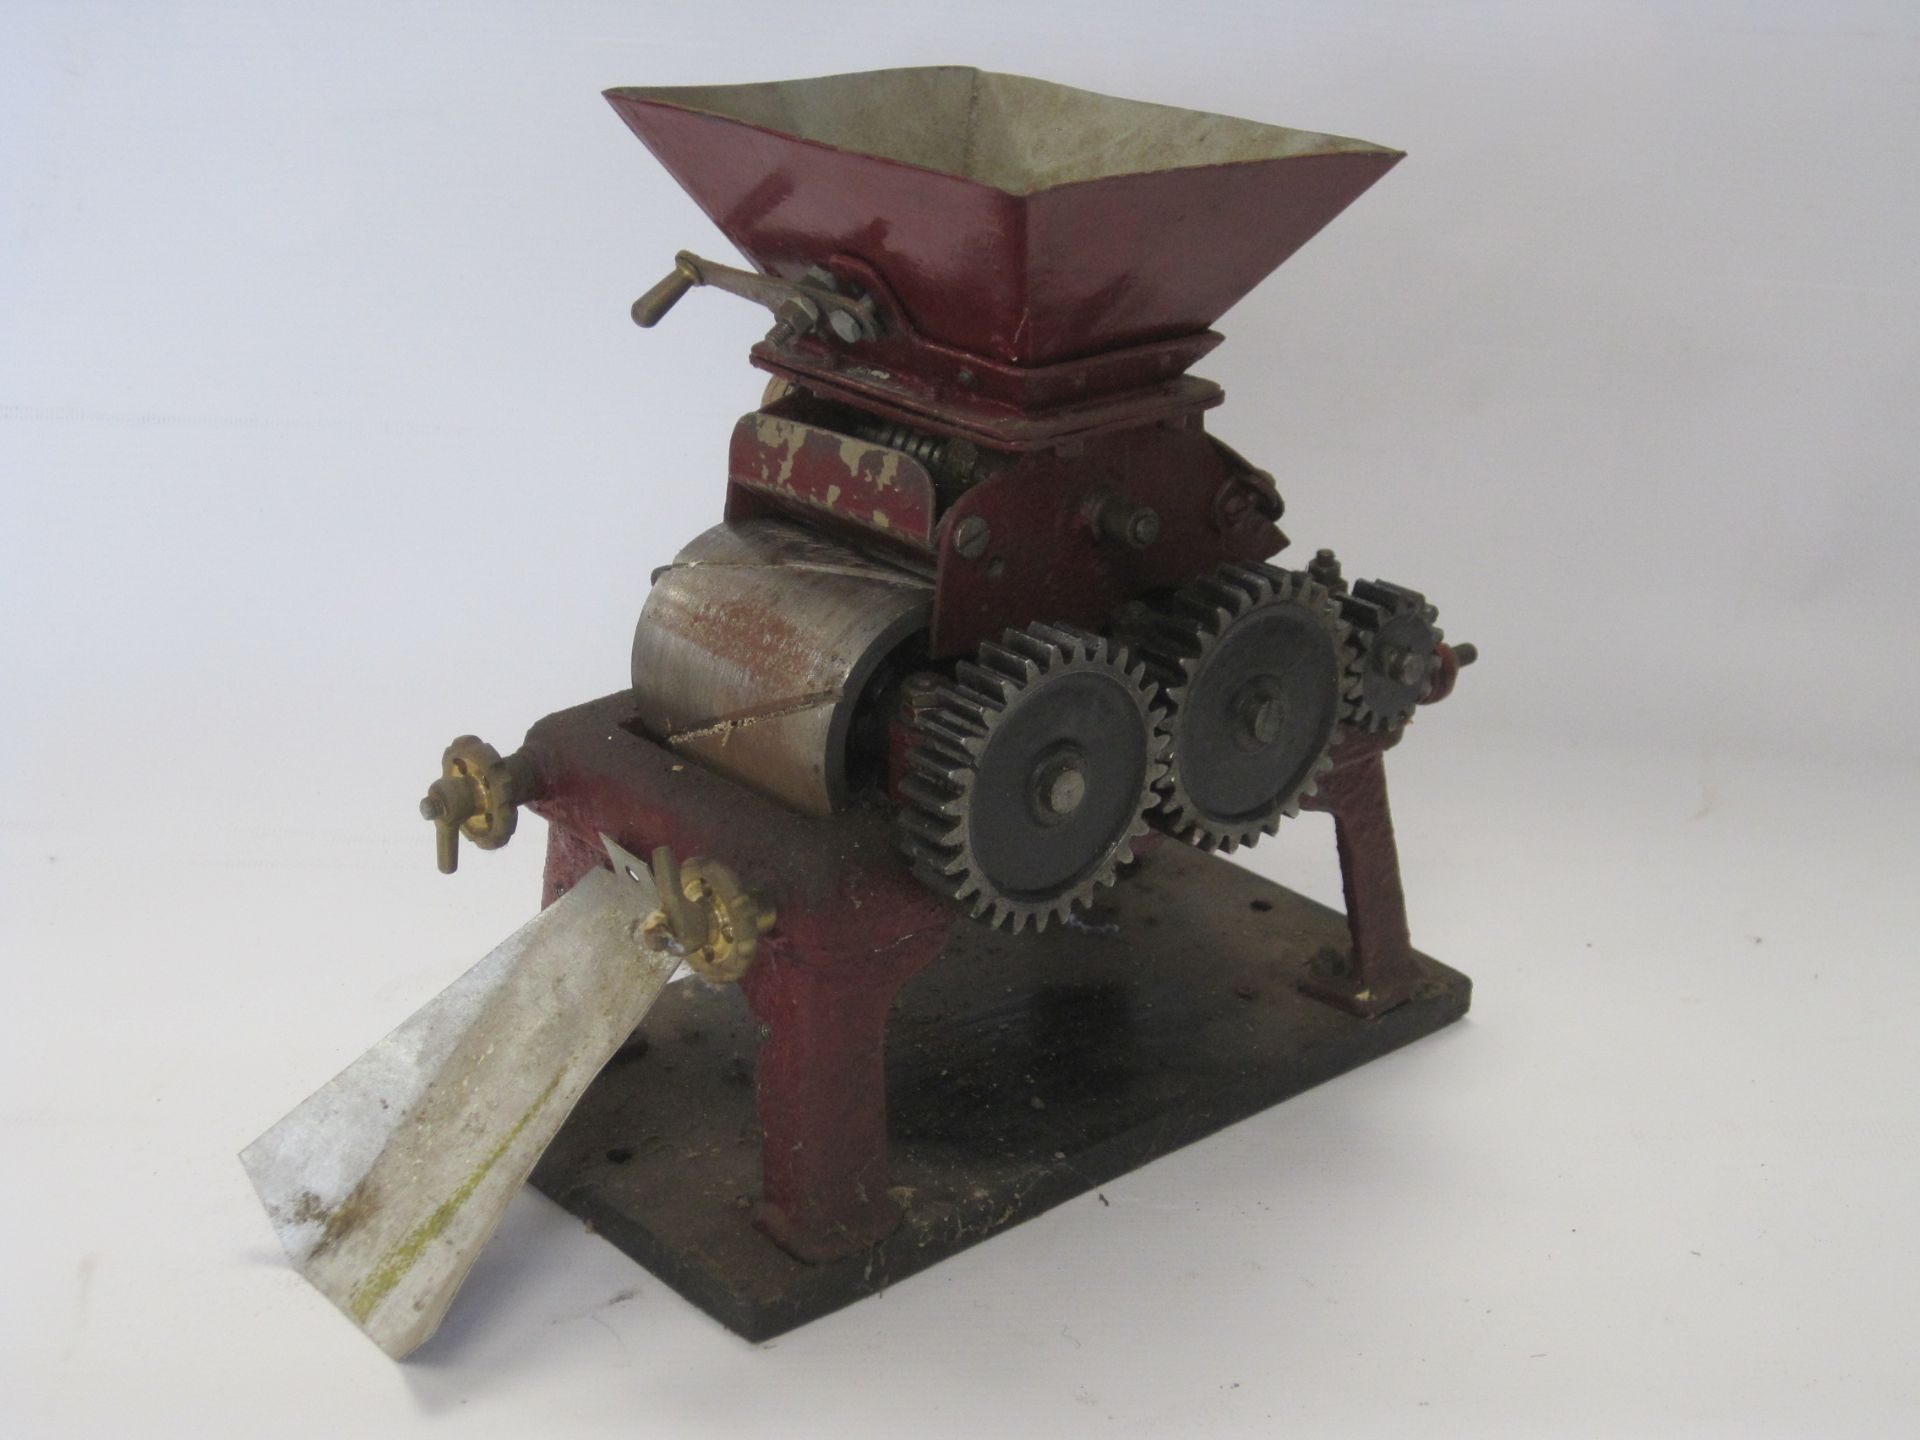 Richard & Chandler scale model roller mill, fully adjustable 10 x 8 x 6 inches - Image 2 of 2